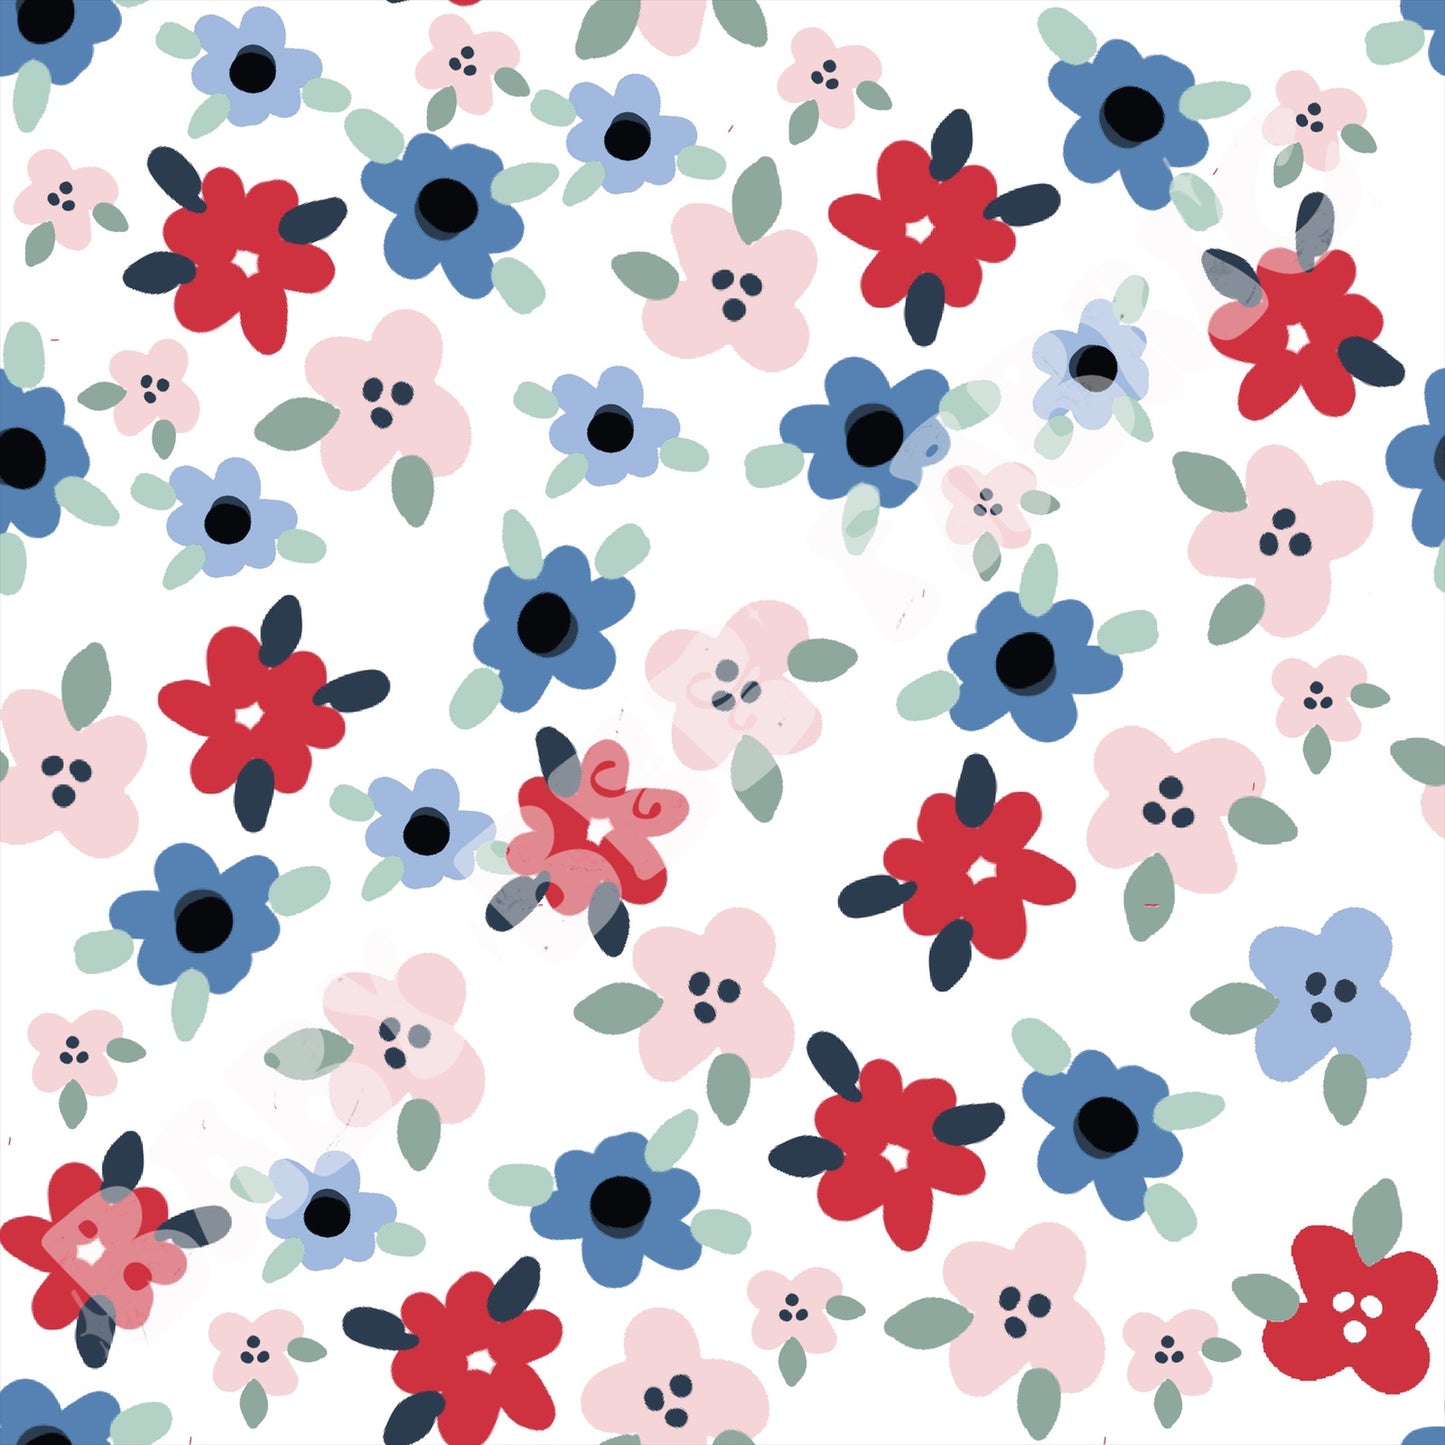 Red, White, and Blue Bubble Floral